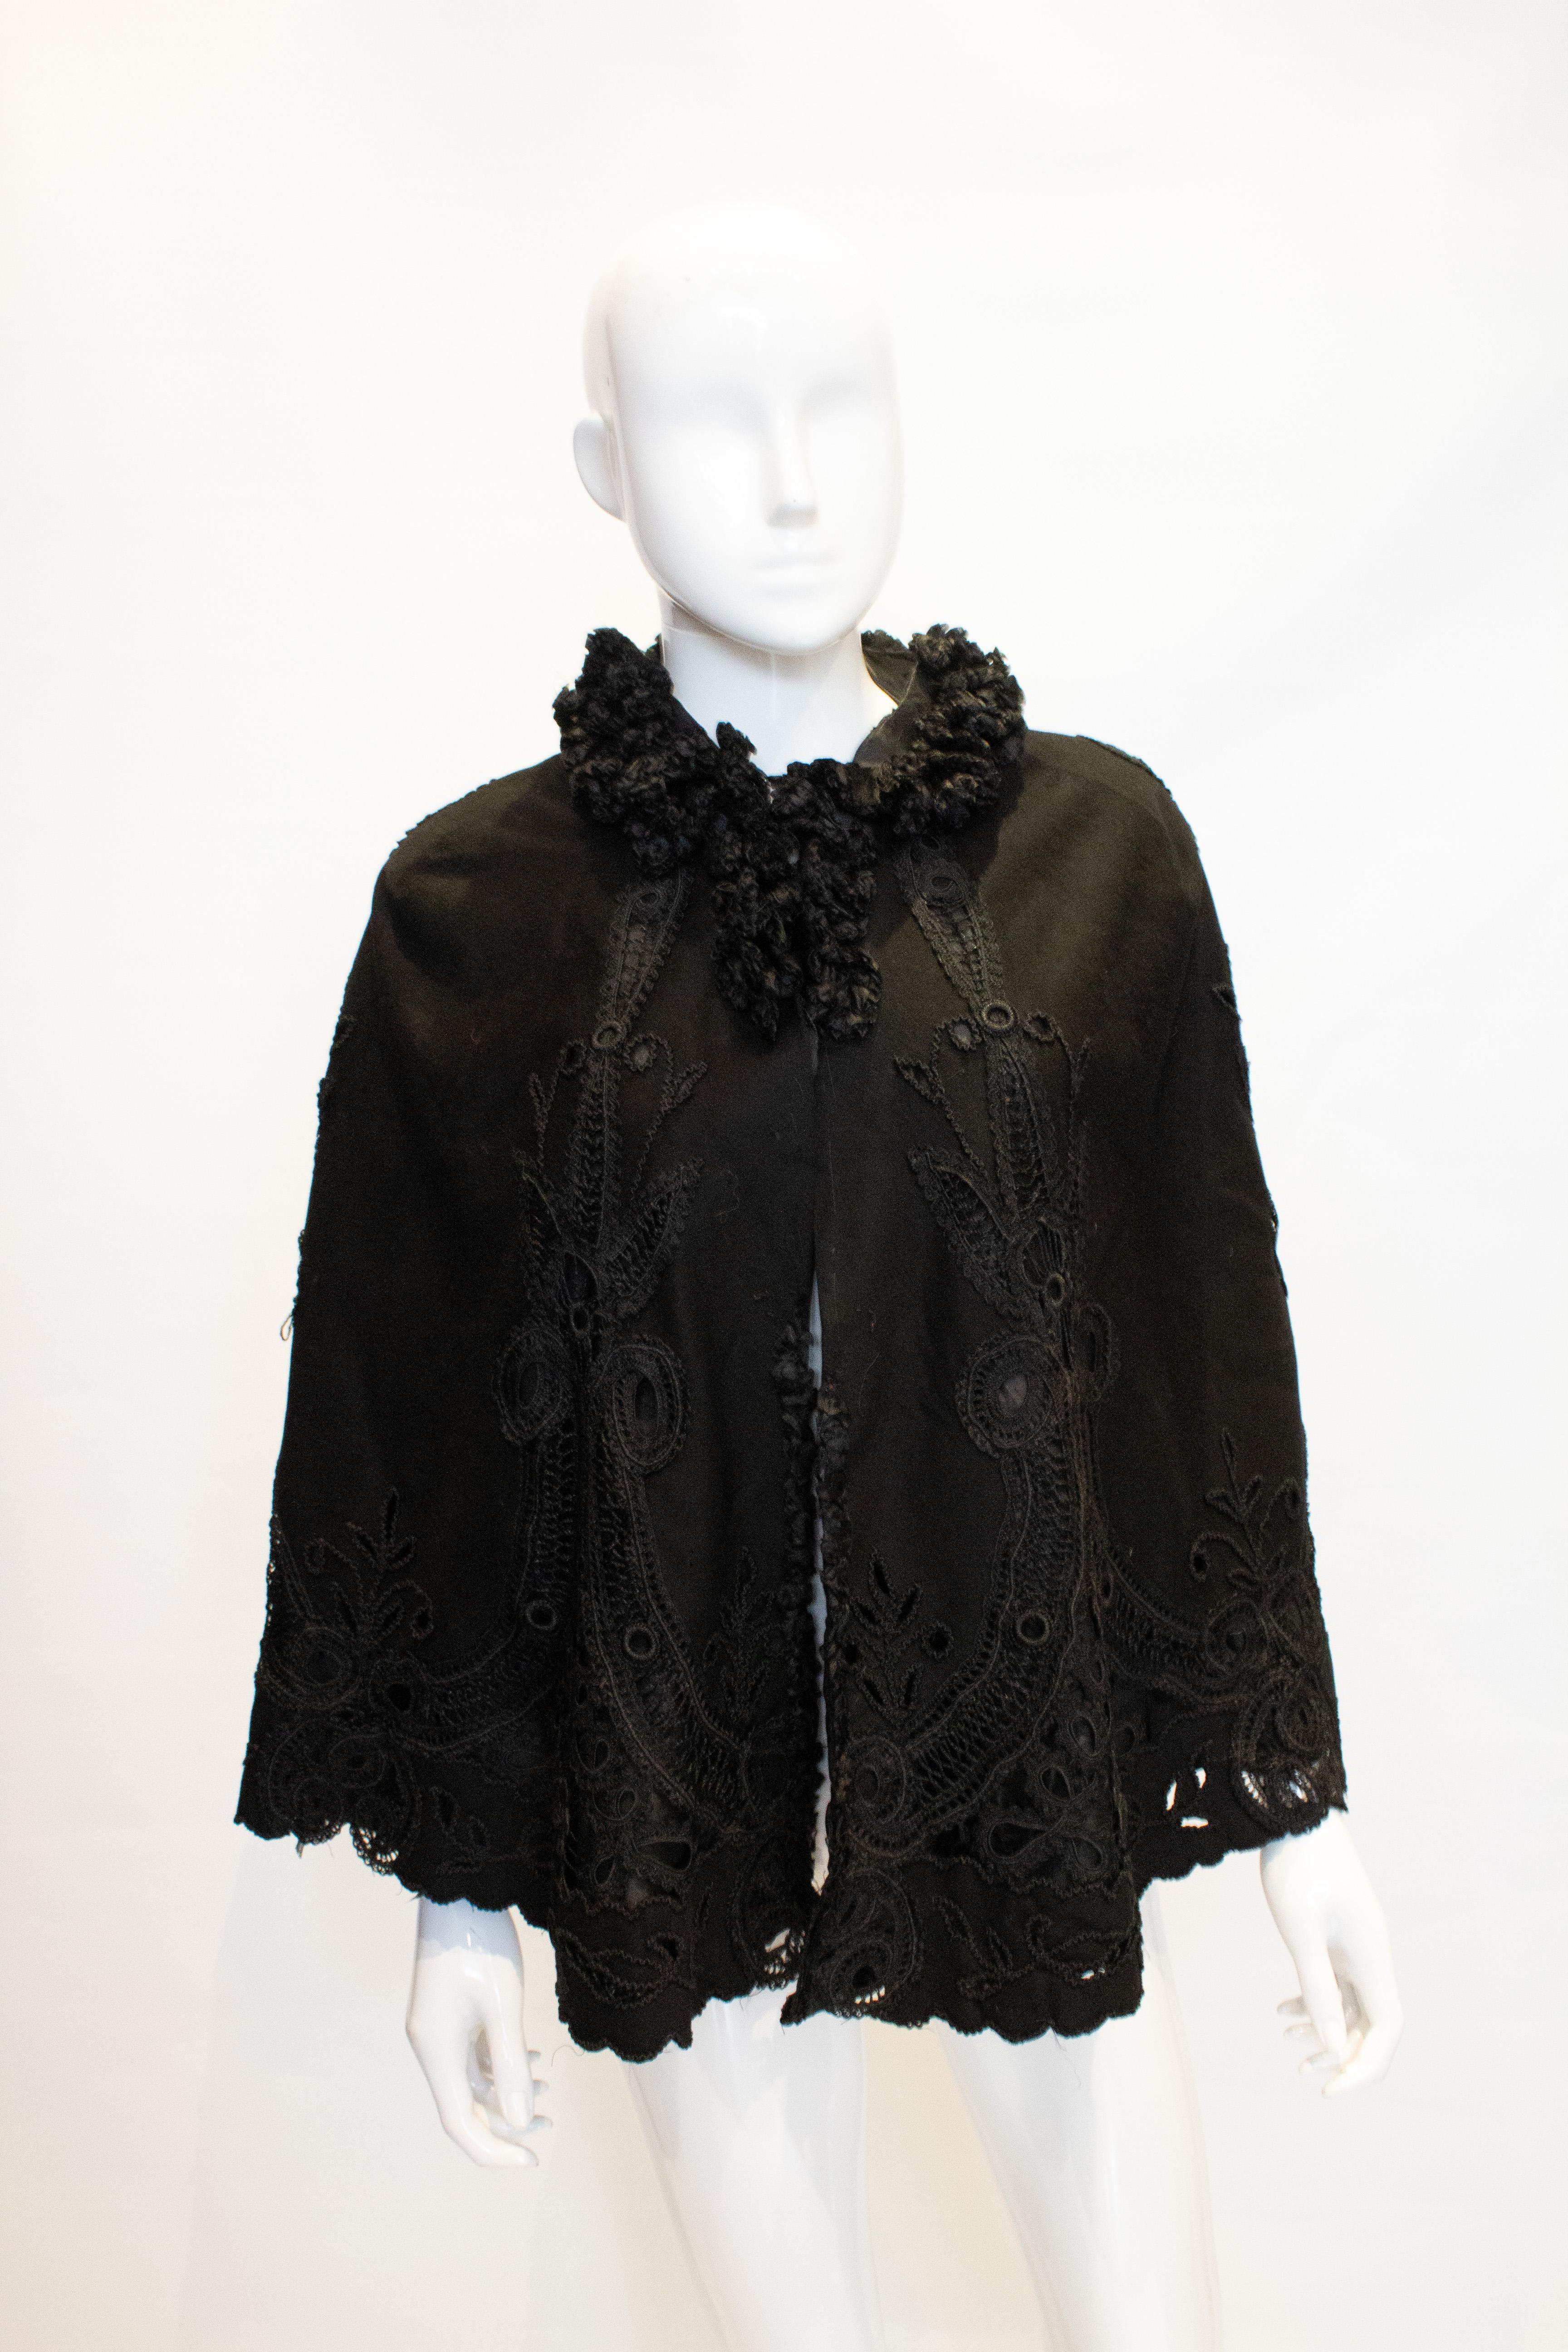 Vintage Black Cape with Embroidery Detail For Sale 1